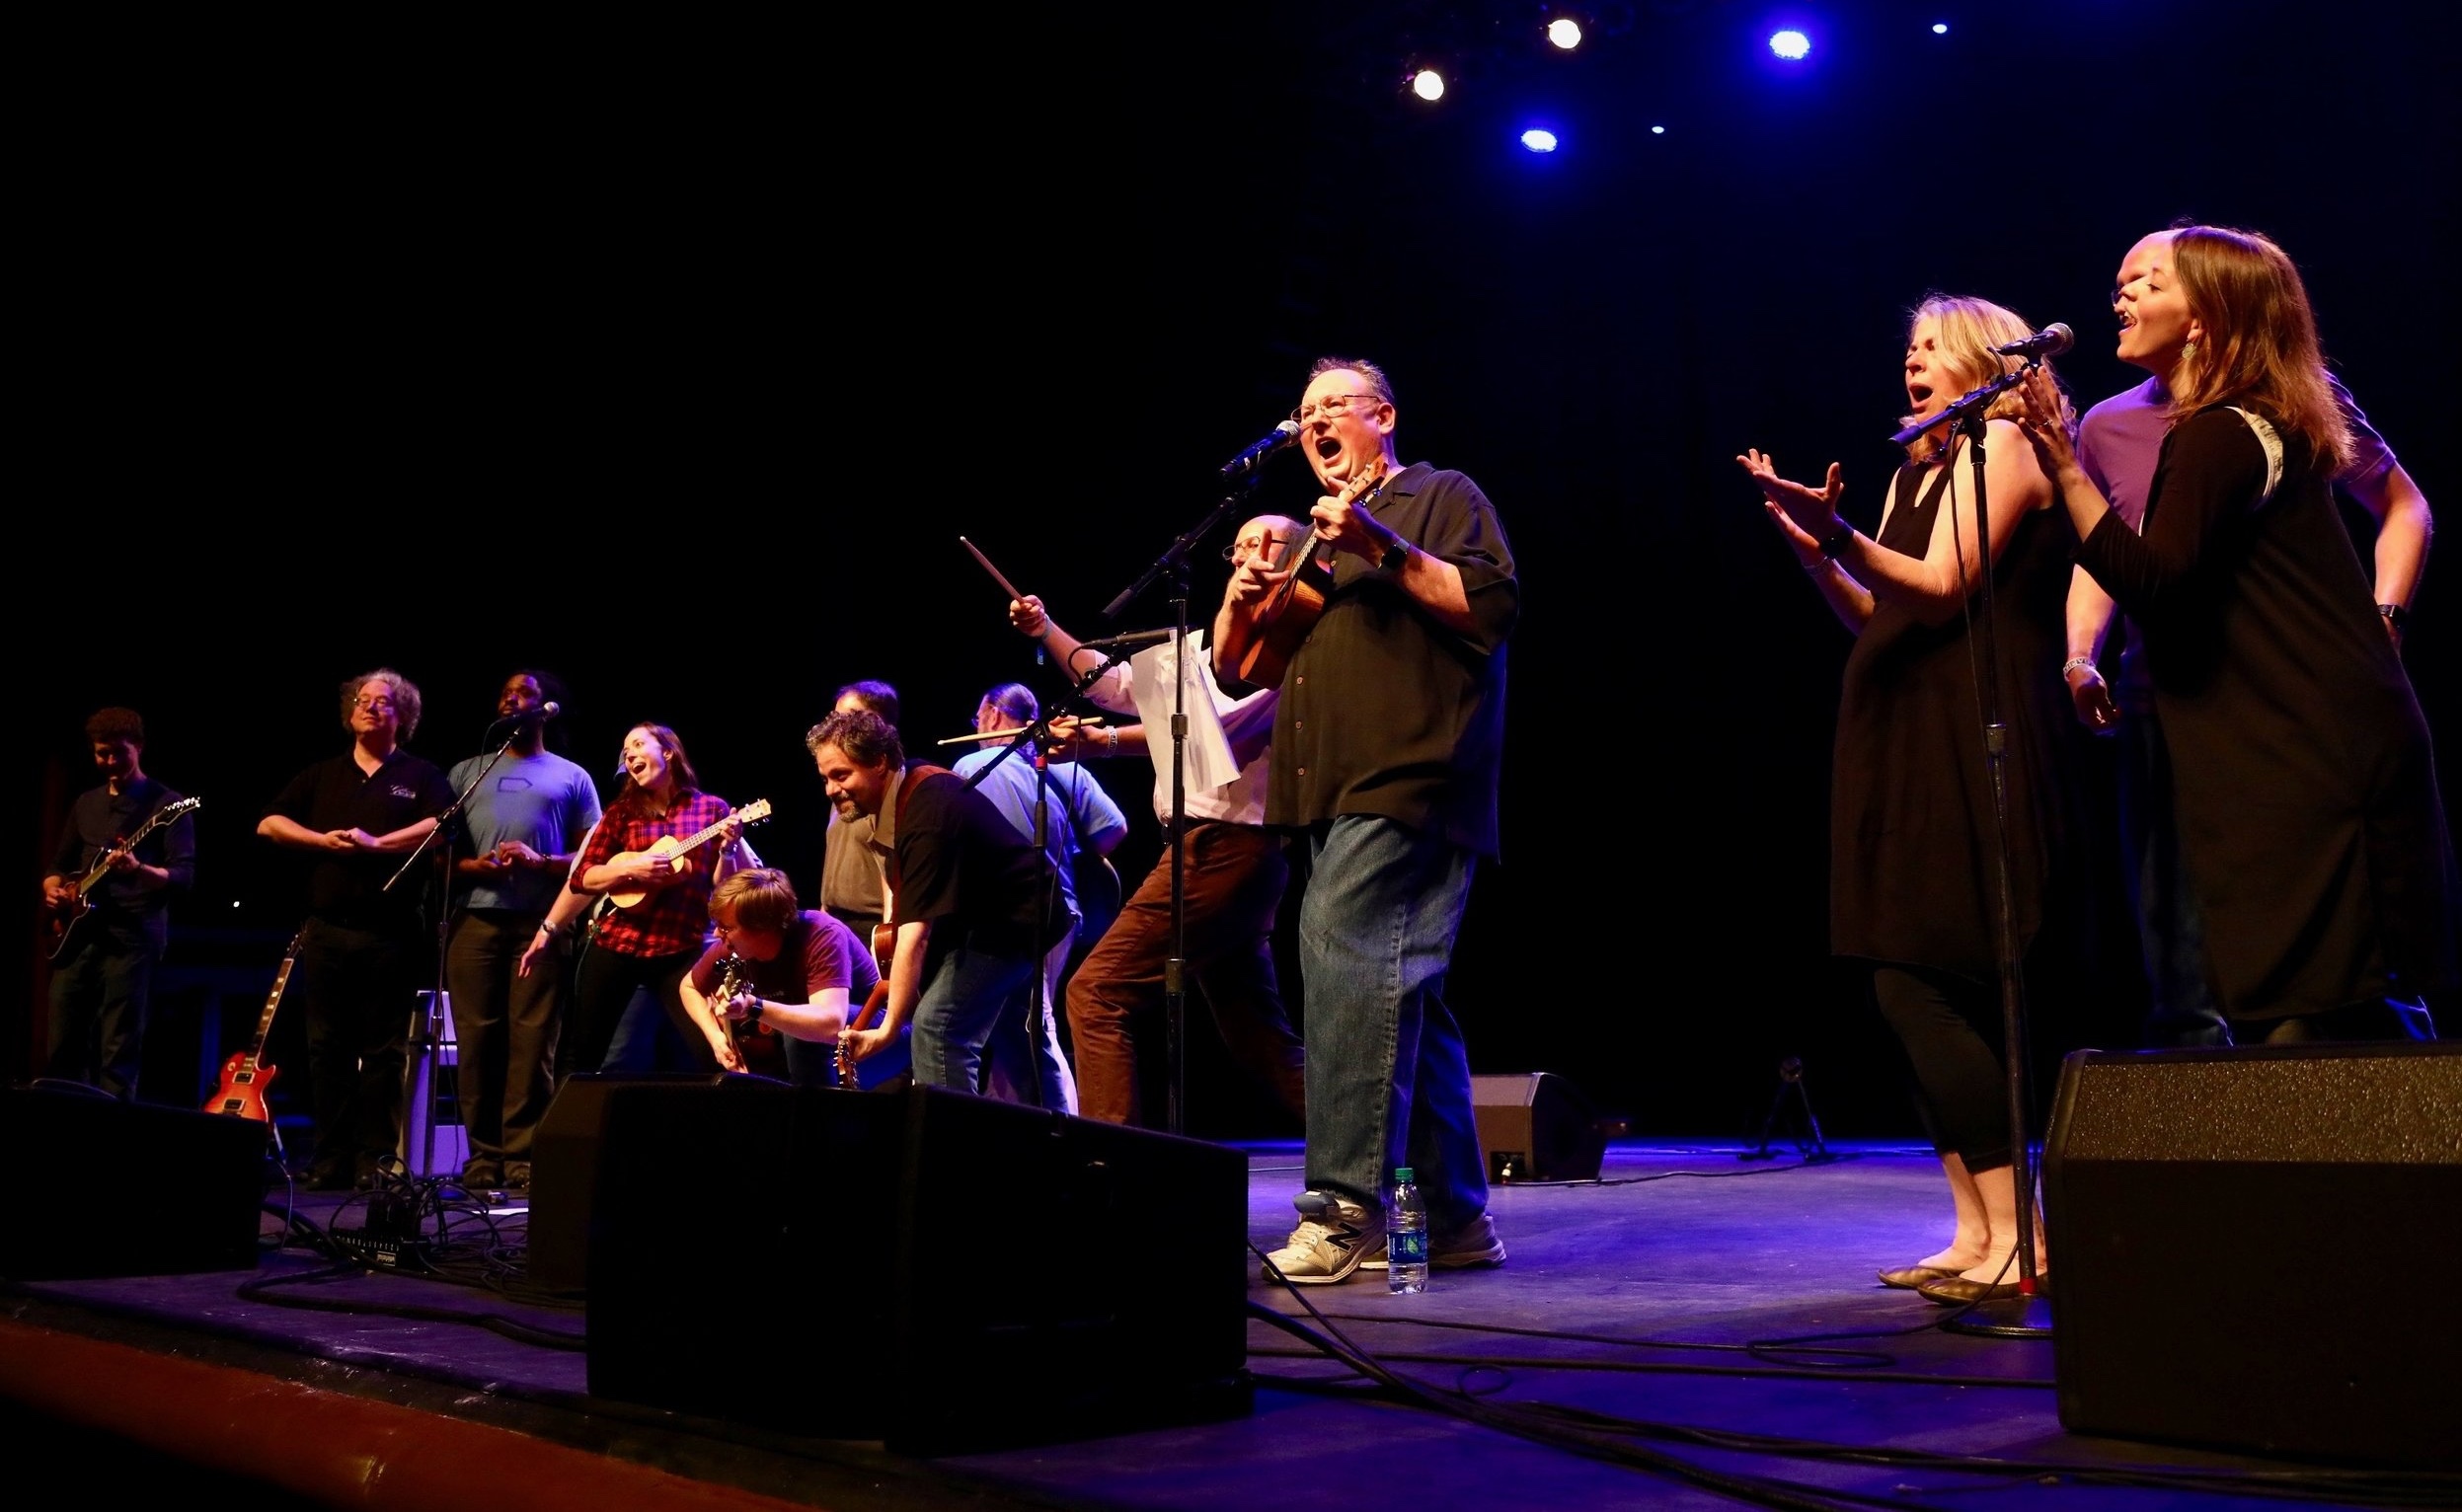 Banner image of James Dempsey and the Breakpoints on stage.